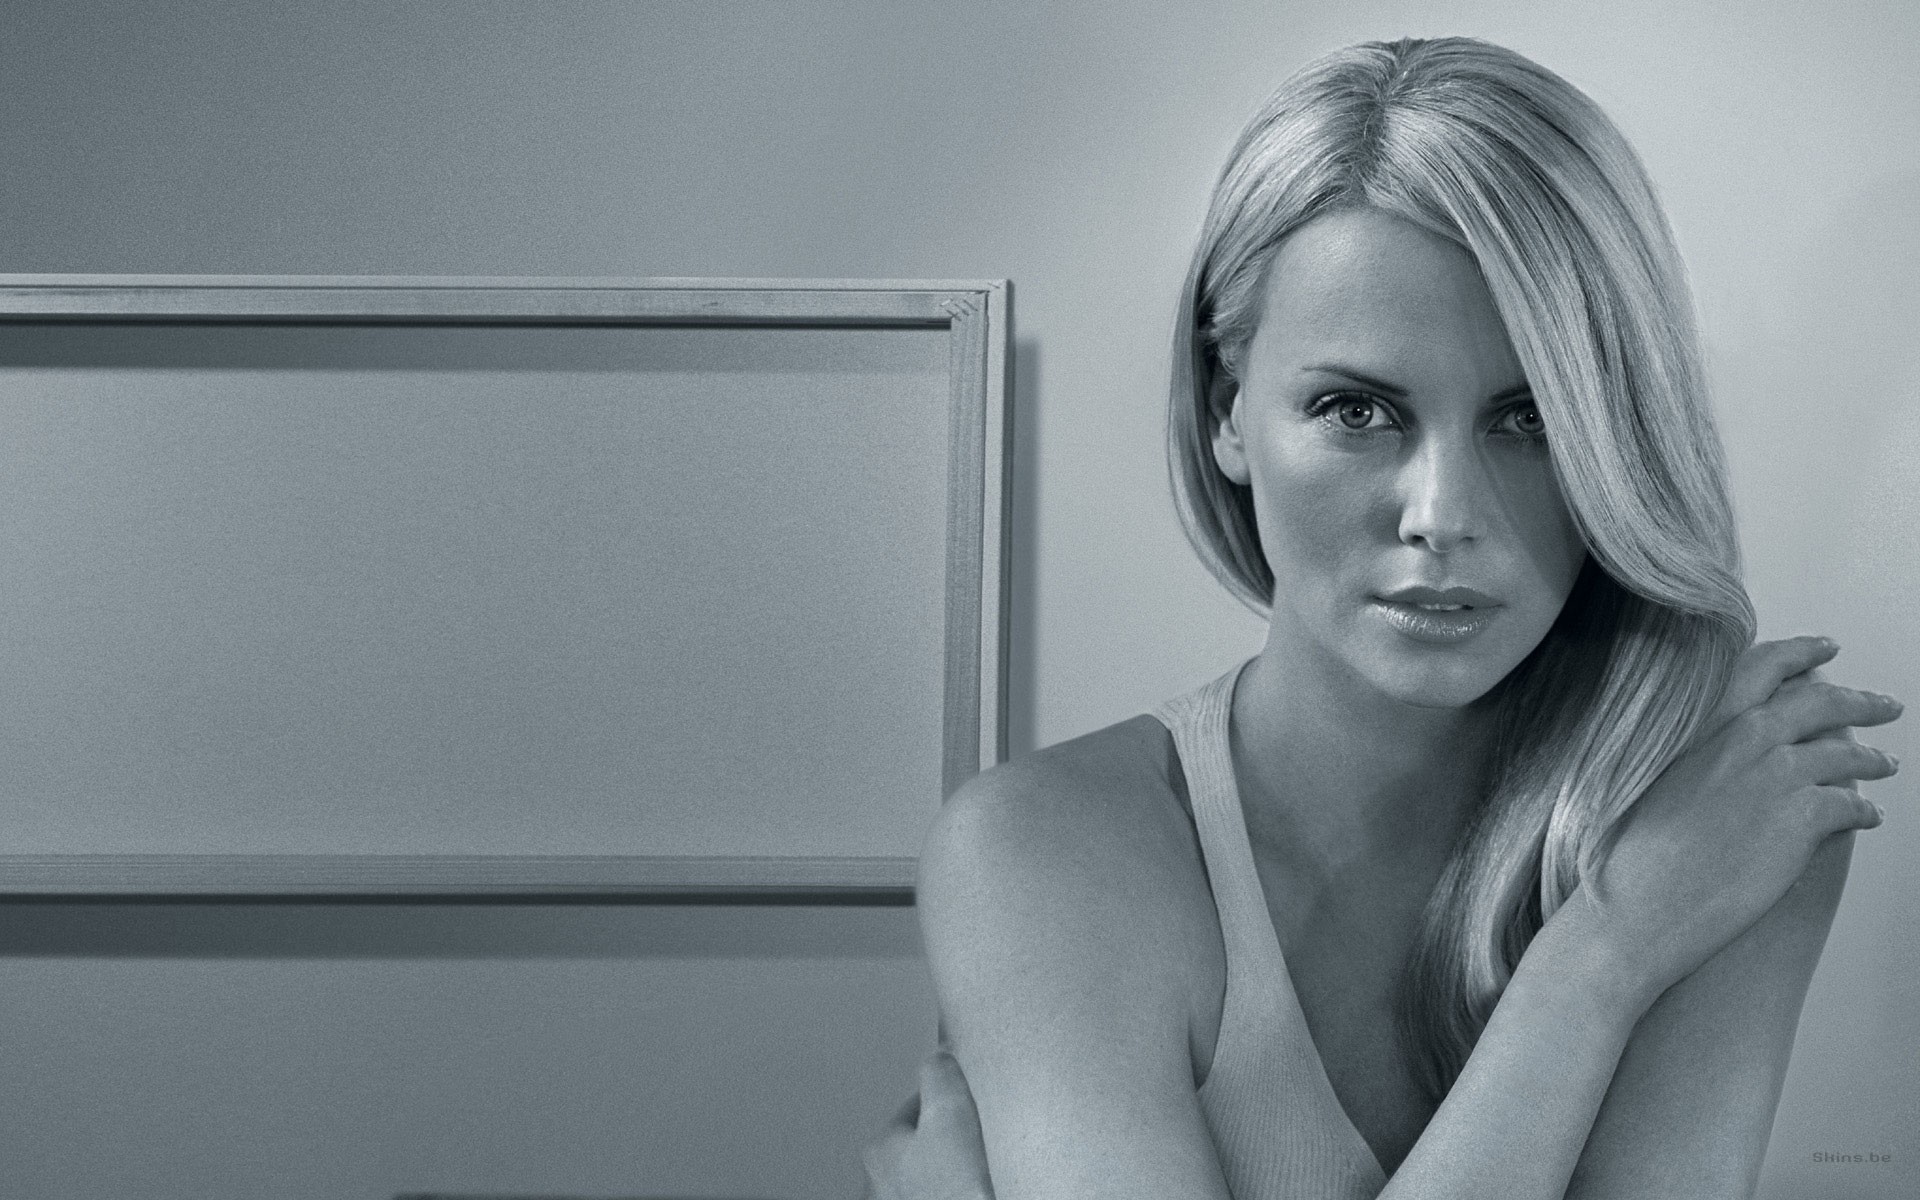 Charlize Theron, a glamorous celebrity, in this stunning desktop wallpaper.